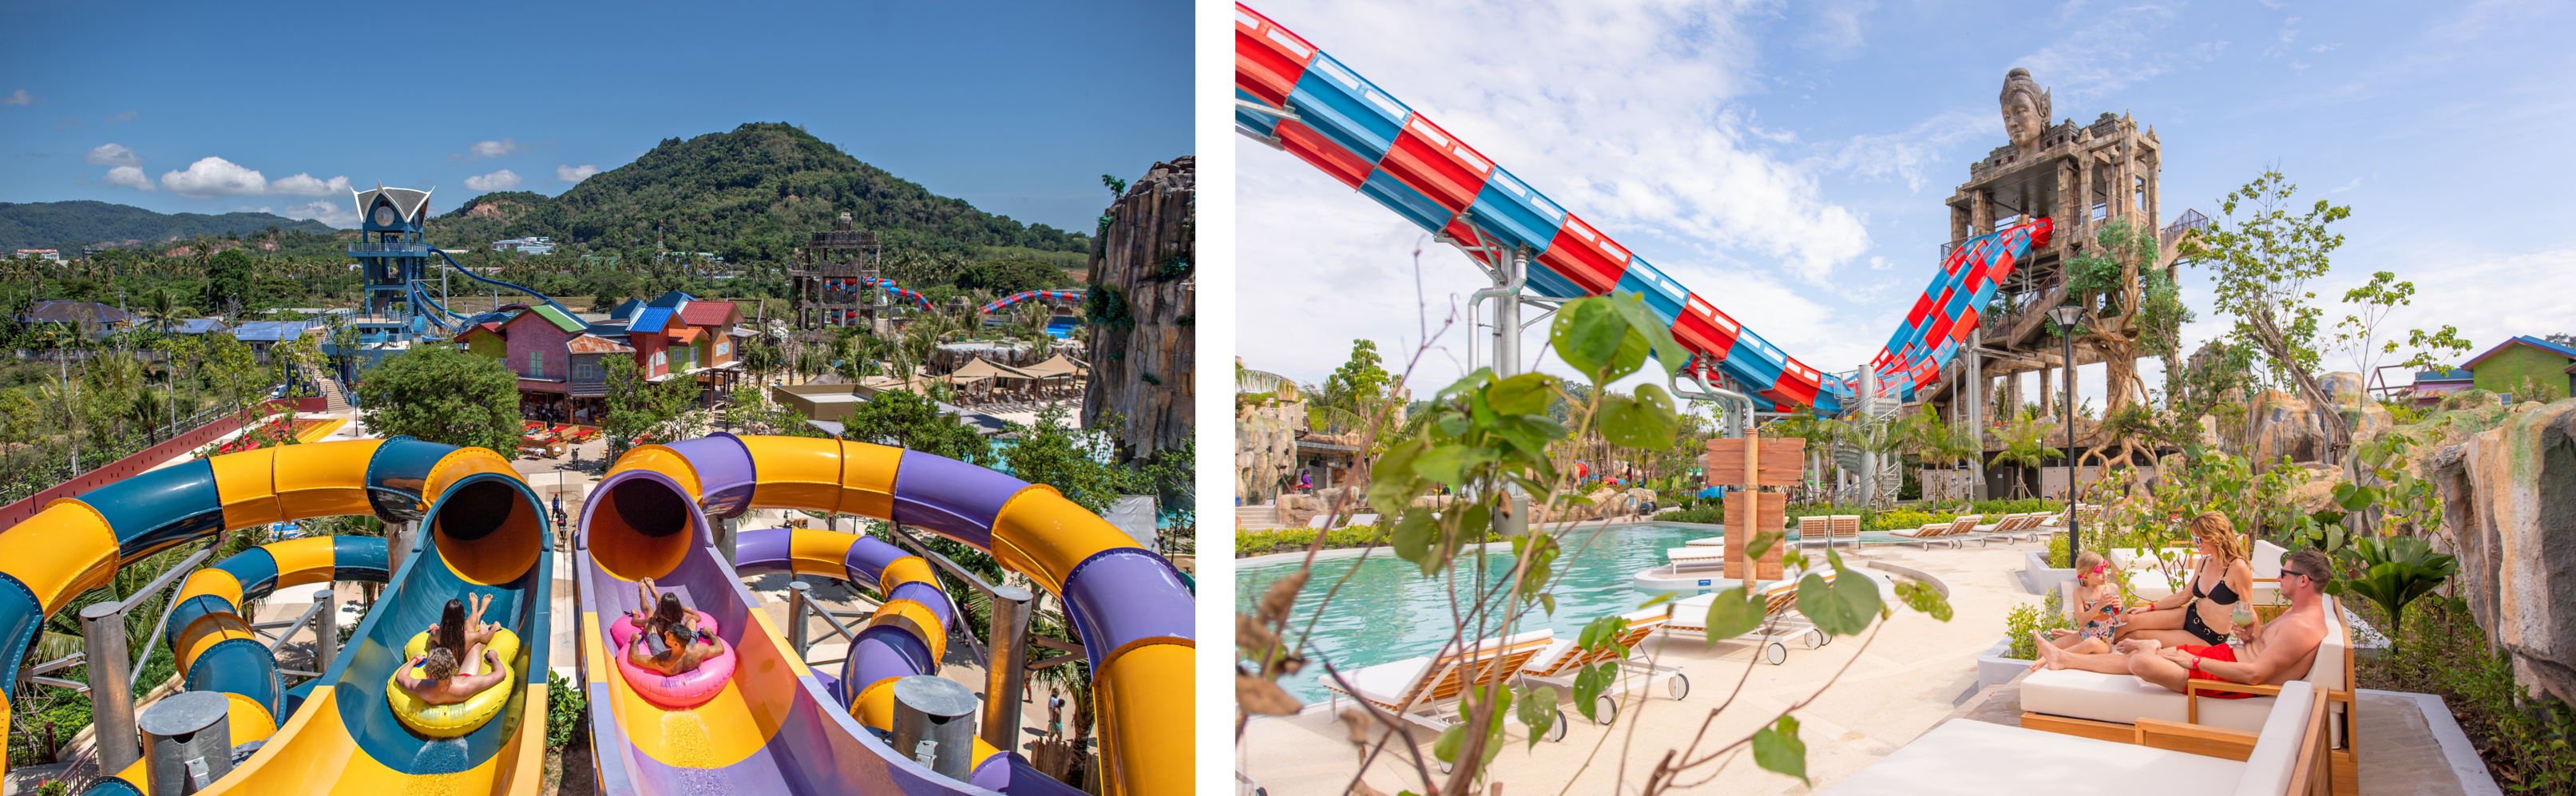 Water slide tower and water park with Thai theming